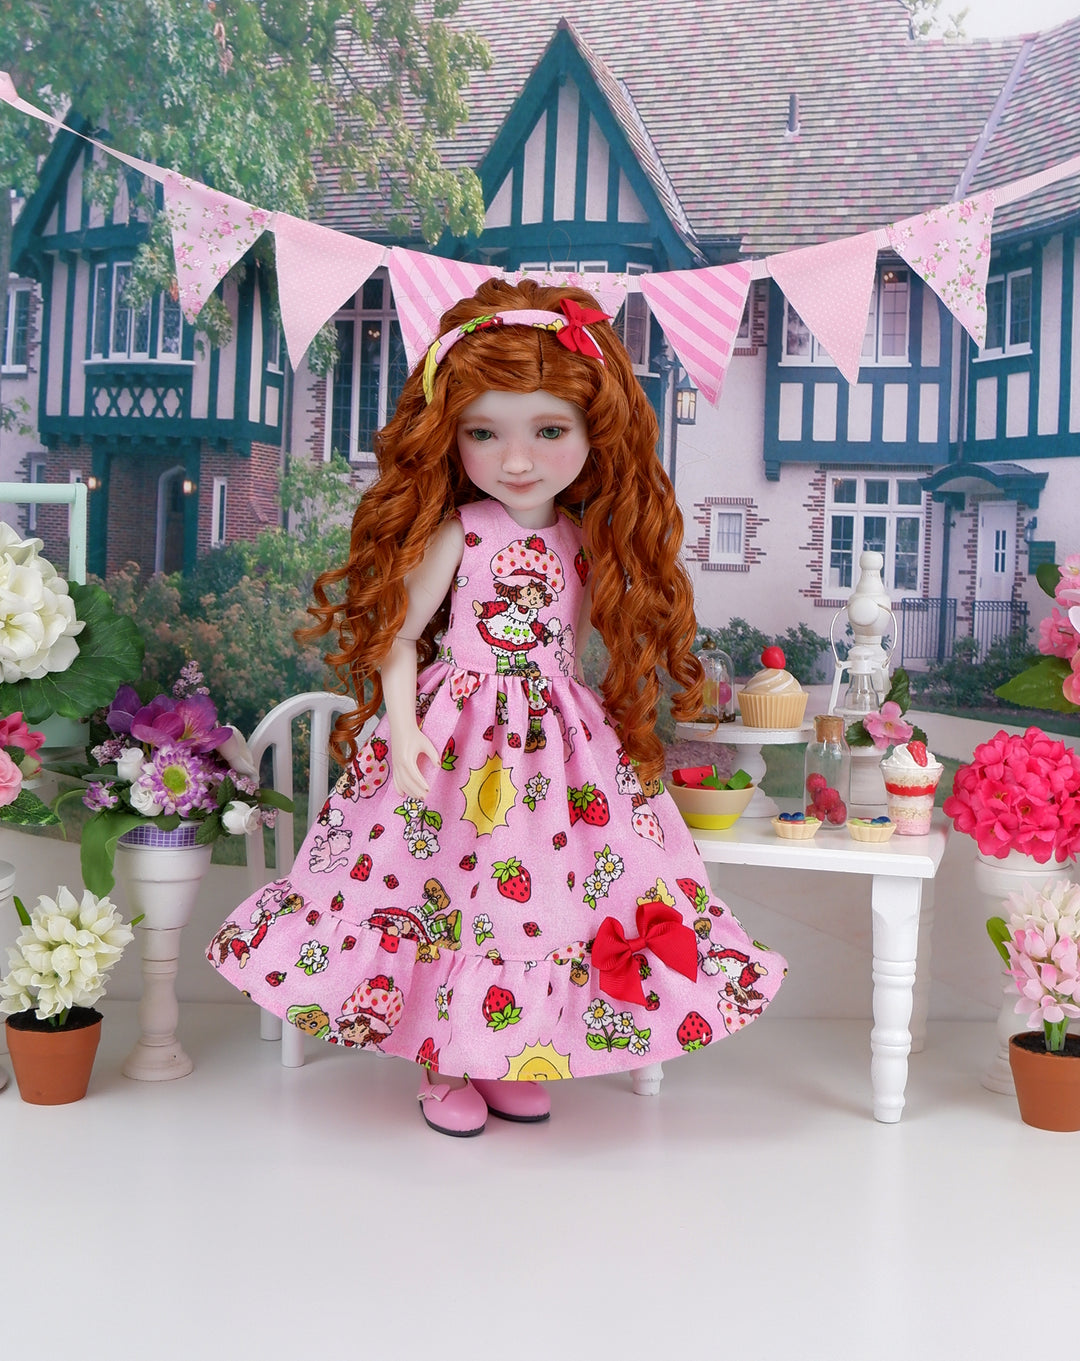 Shortcake & Custard - dress with shoes for Ruby Red Fashion Friends doll